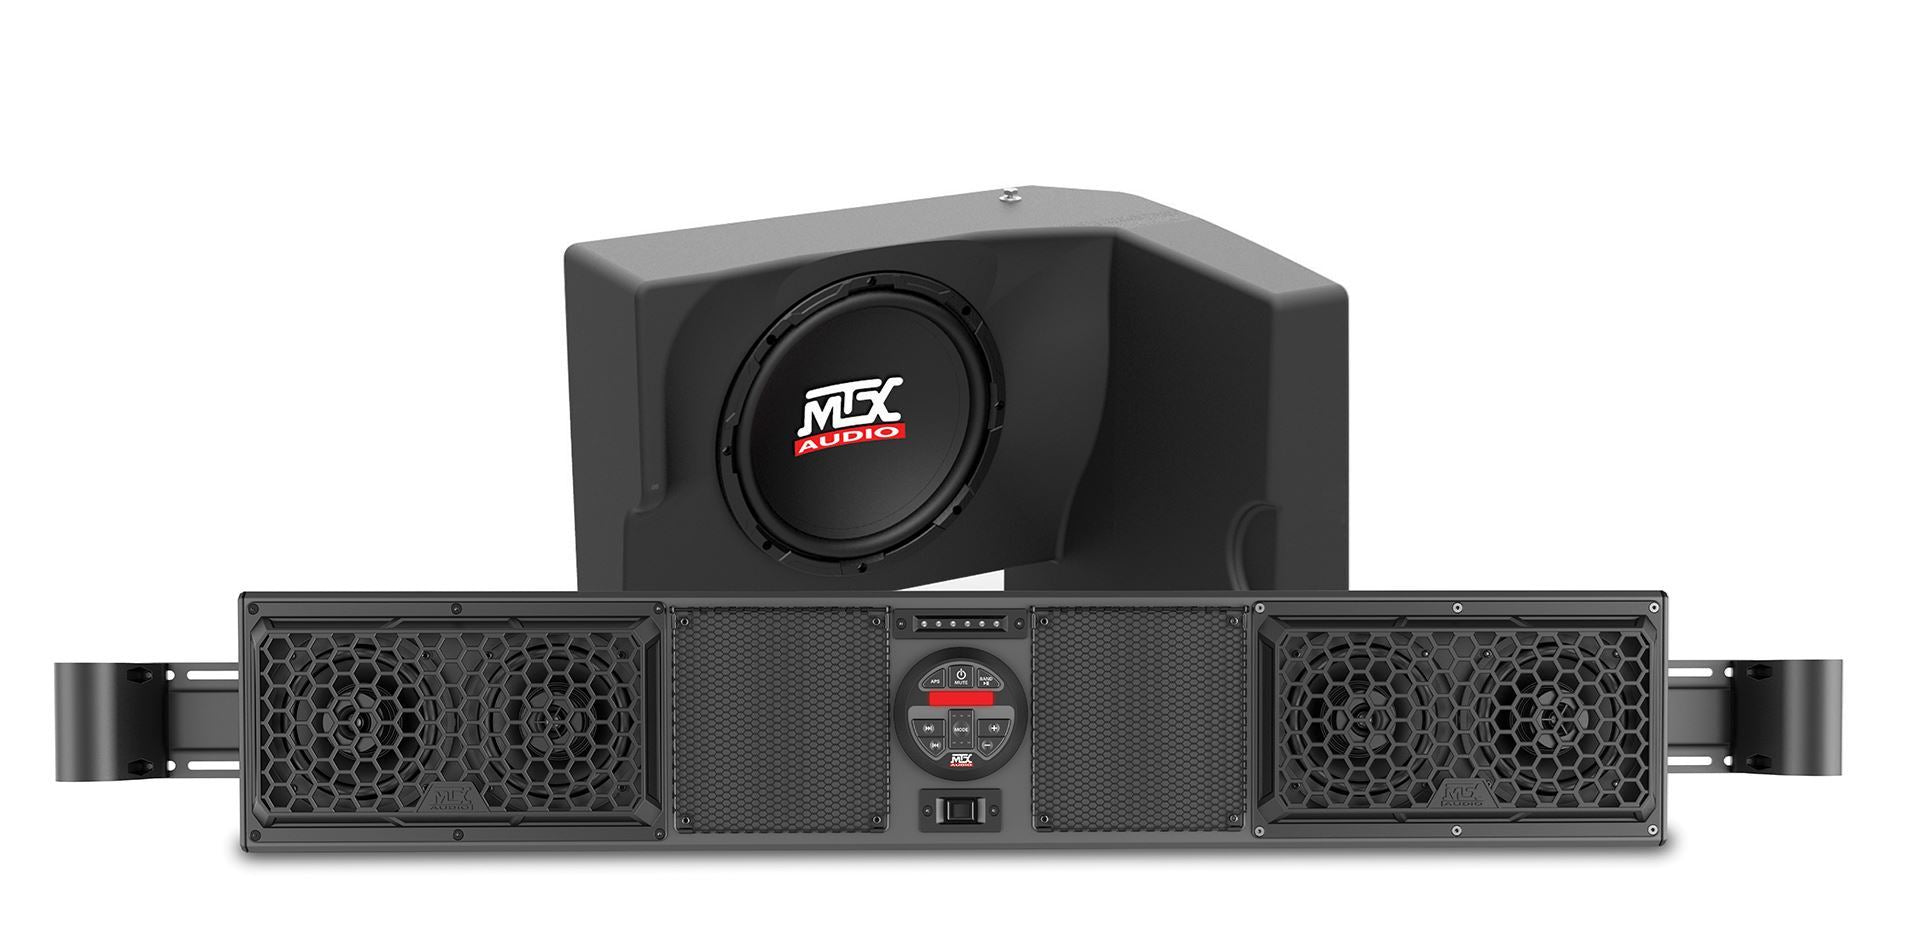 mtx ranger stereo kit with sound bar and subwoofer on white background